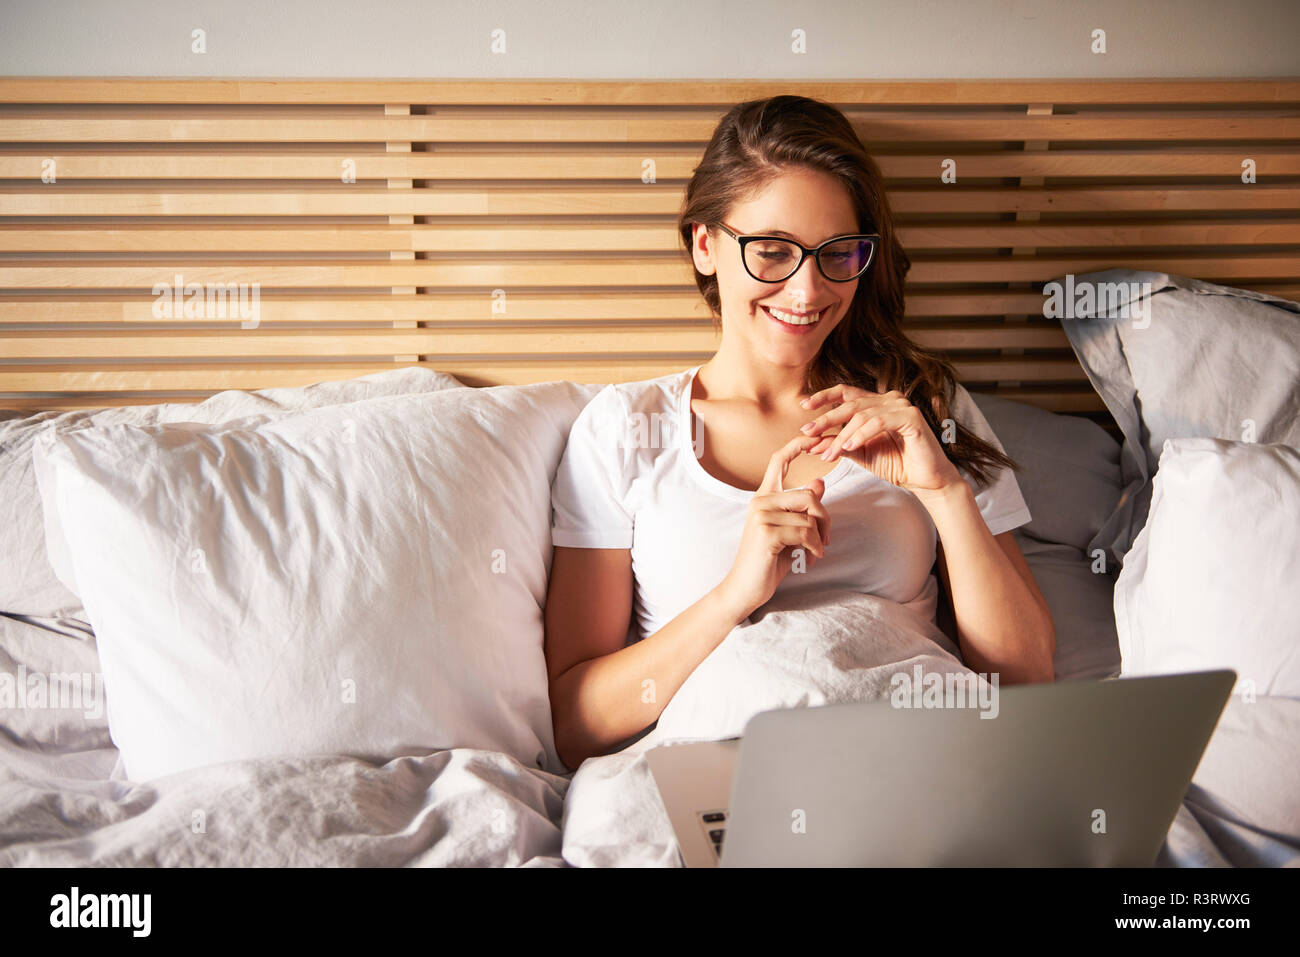 Portrait of smiling young woman lying on bed using laptop Stock Photo